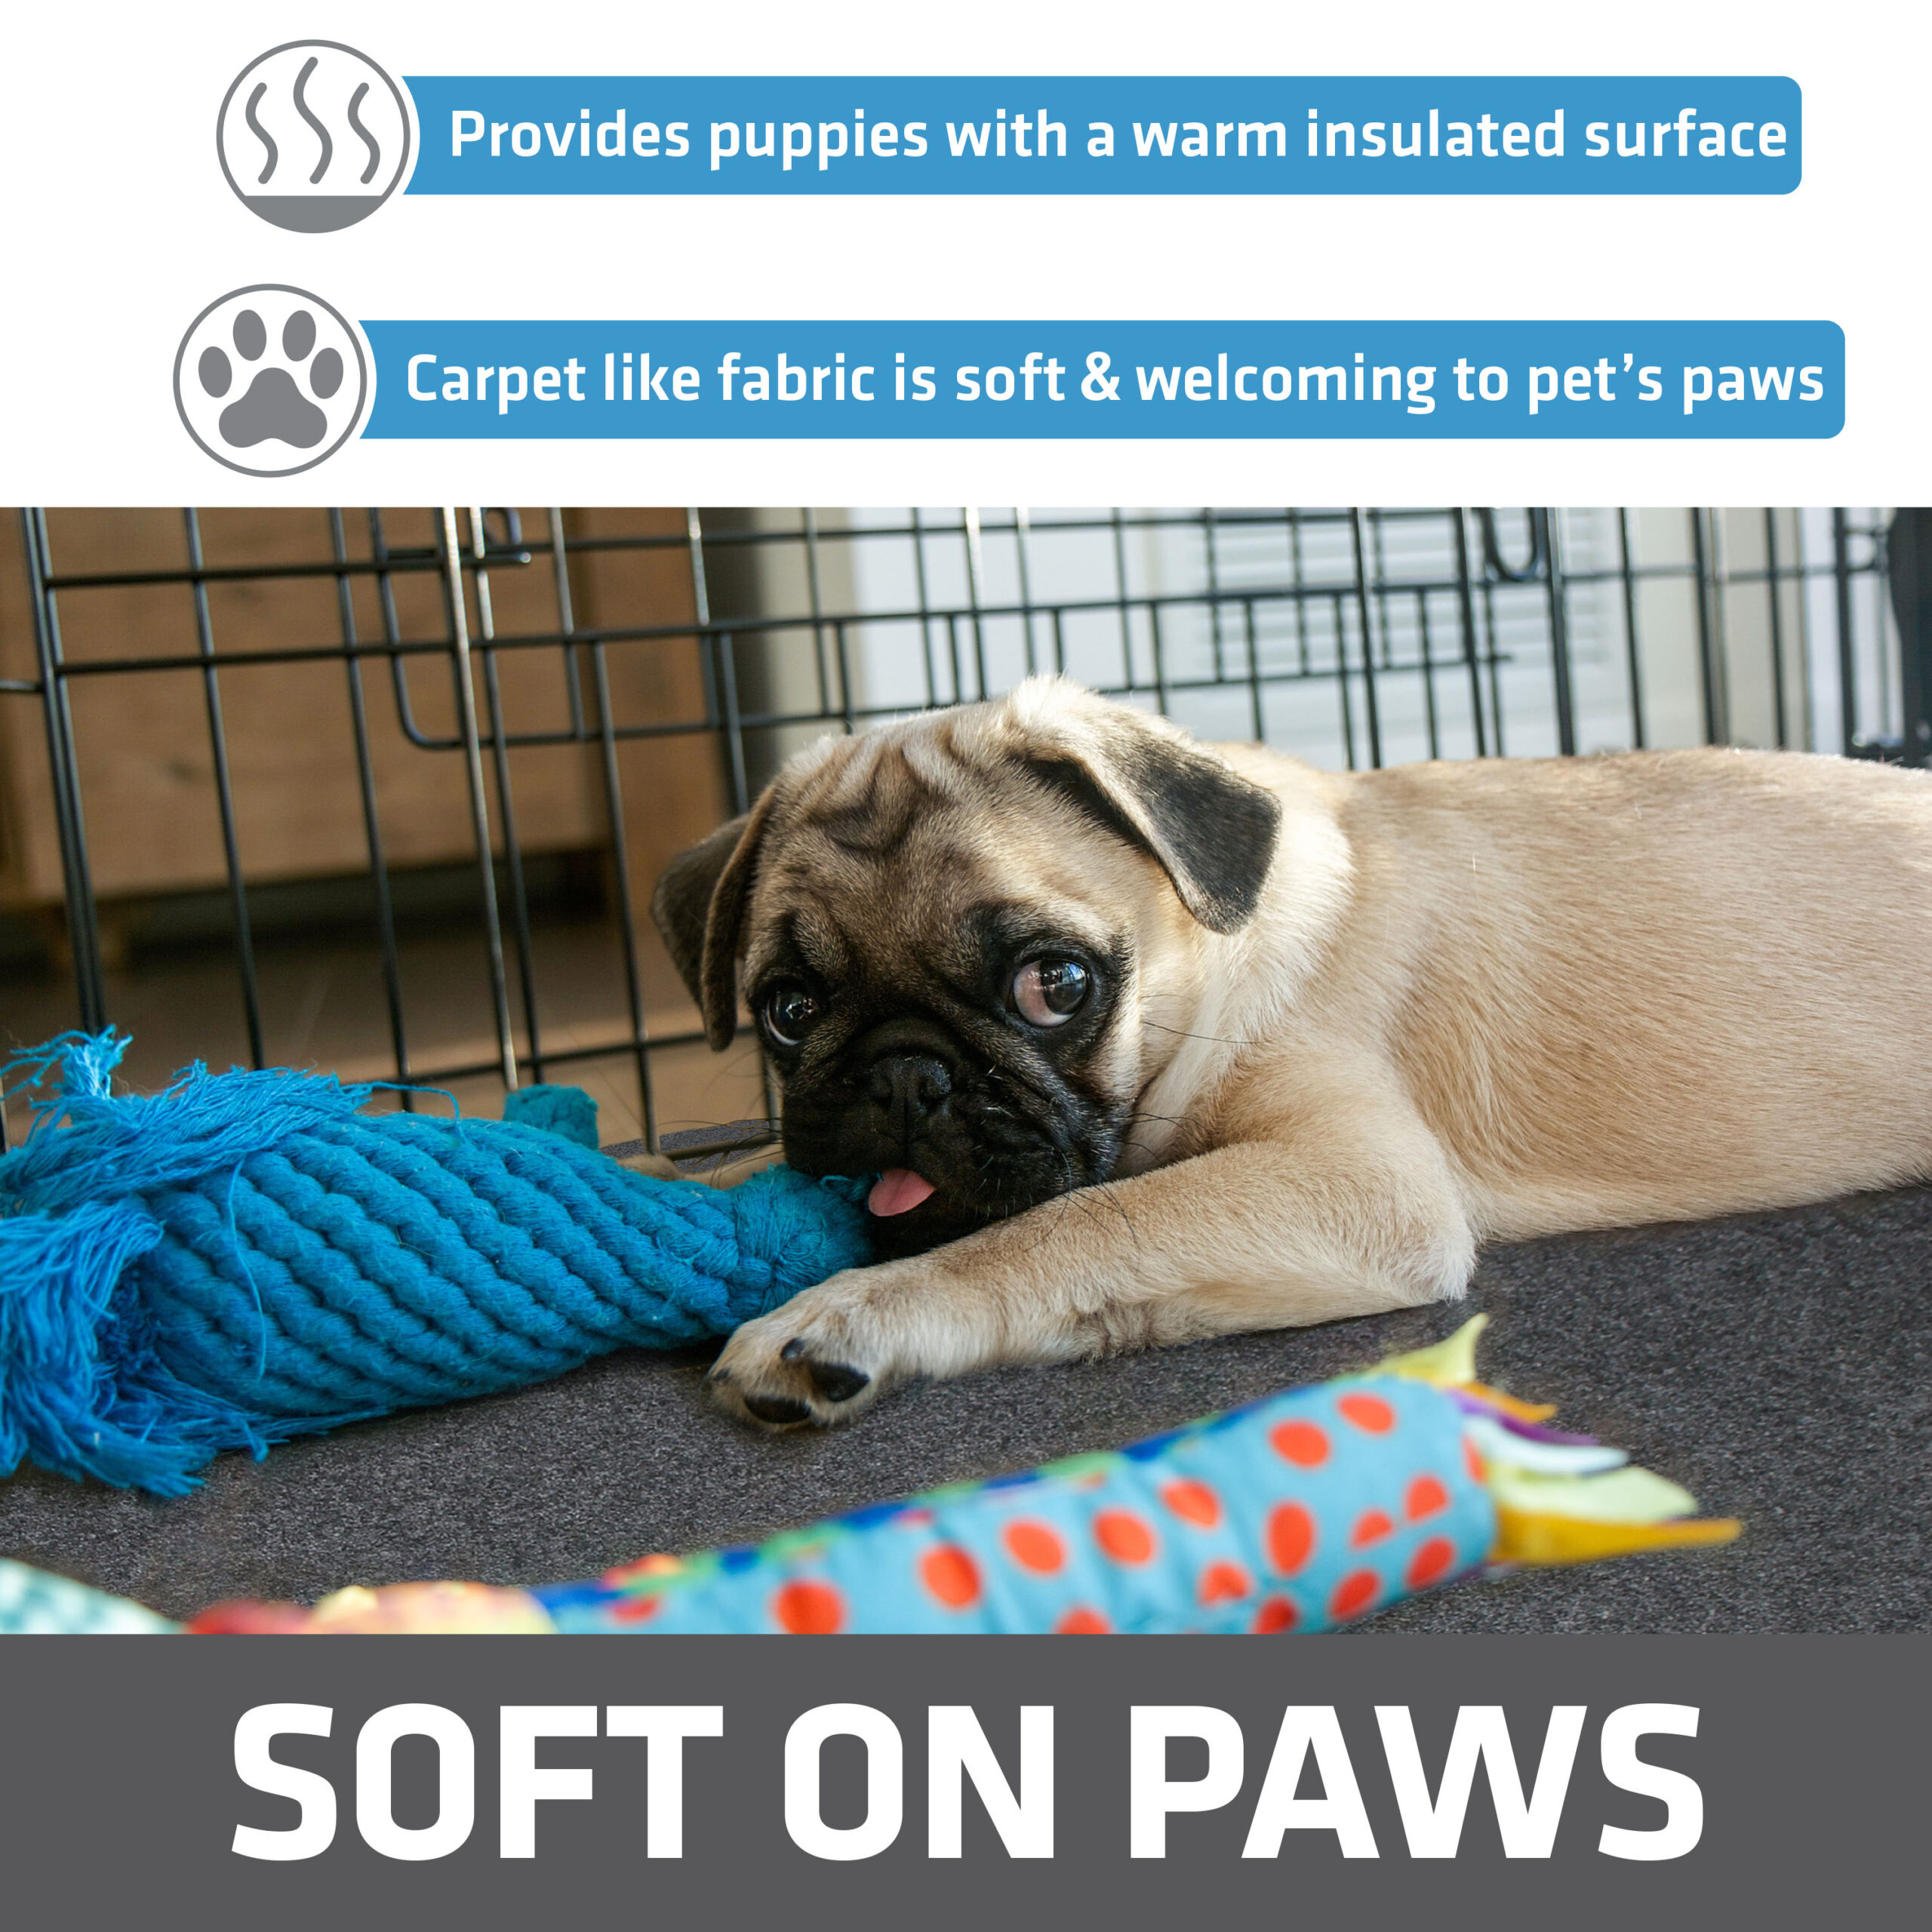 https://drymate.com/wp-content/uploads/2021/07/4-Soft-on-Paws_Playpen-in-Use-Image-LISTING-scaled.jpg